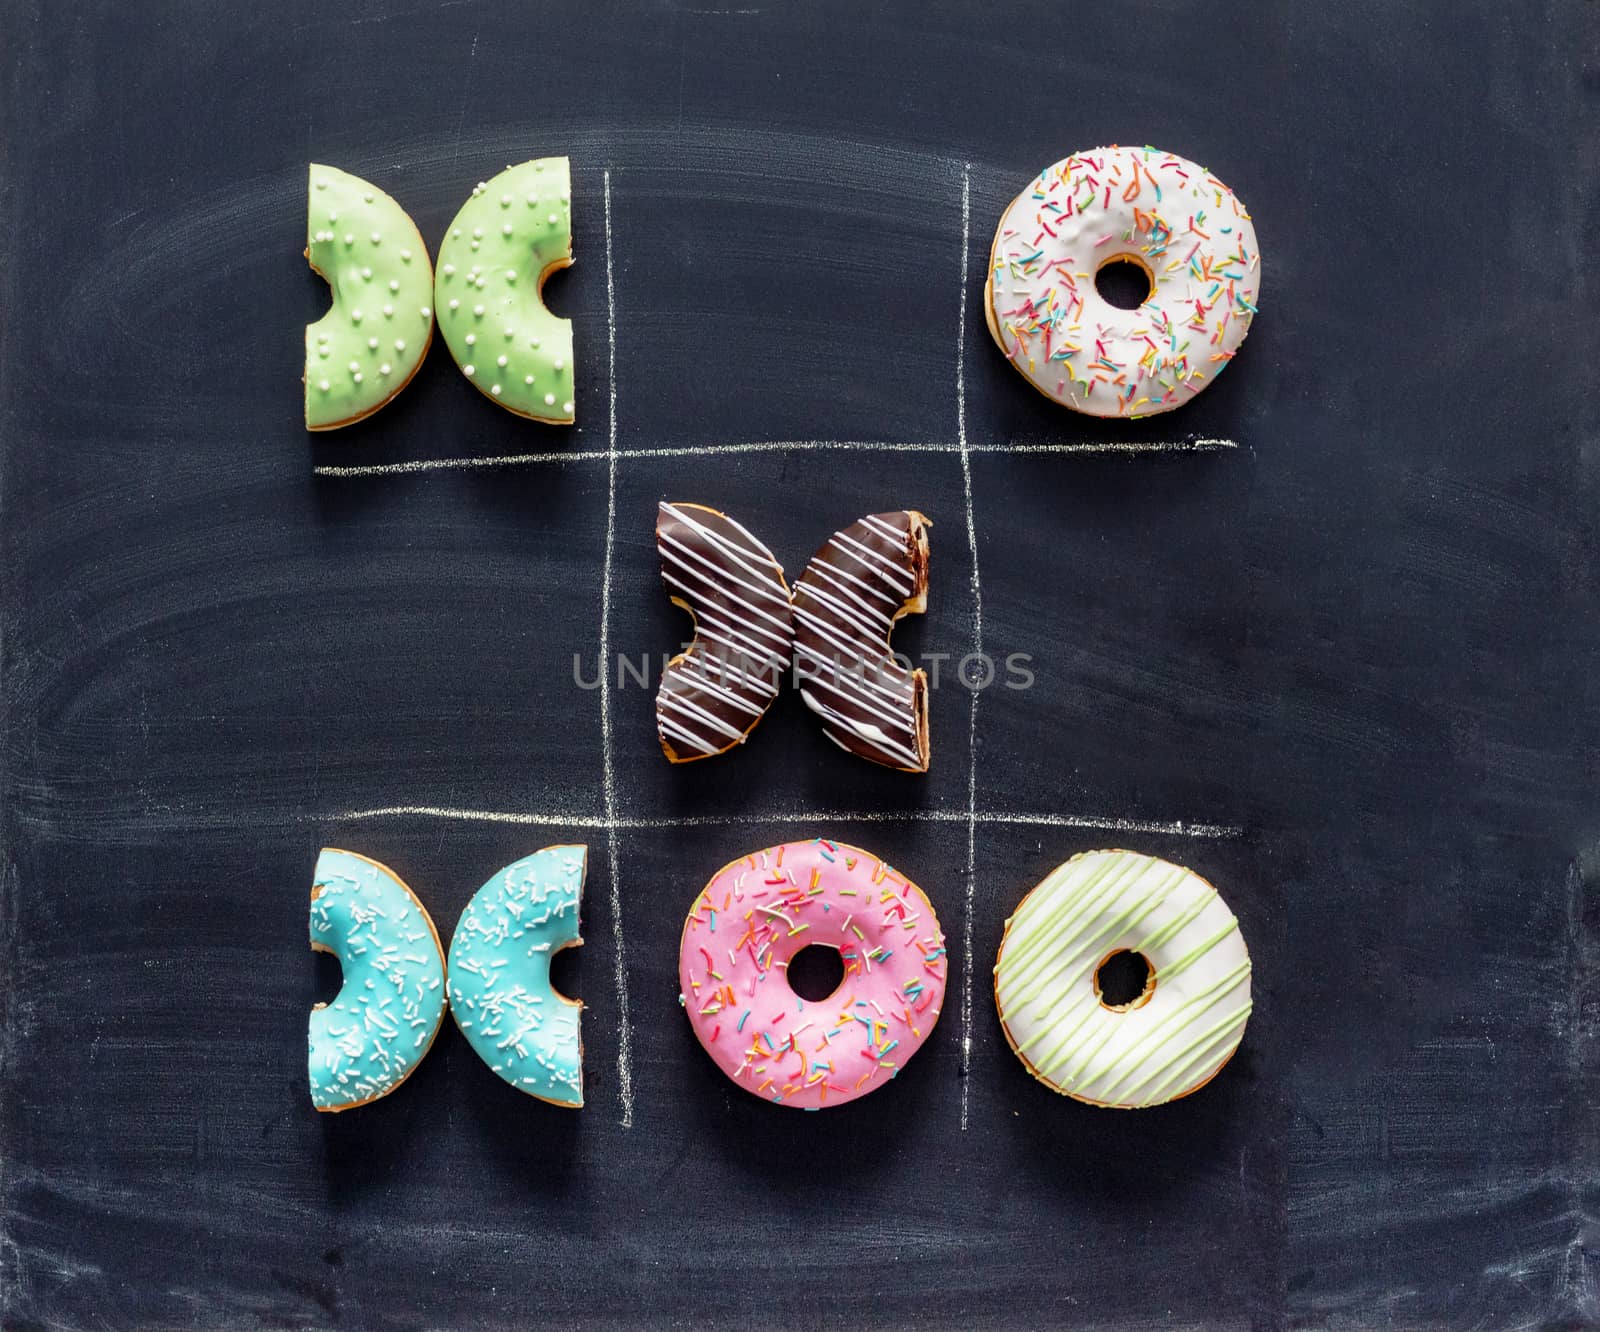 Tic tac toe made of donuts by fascinadora